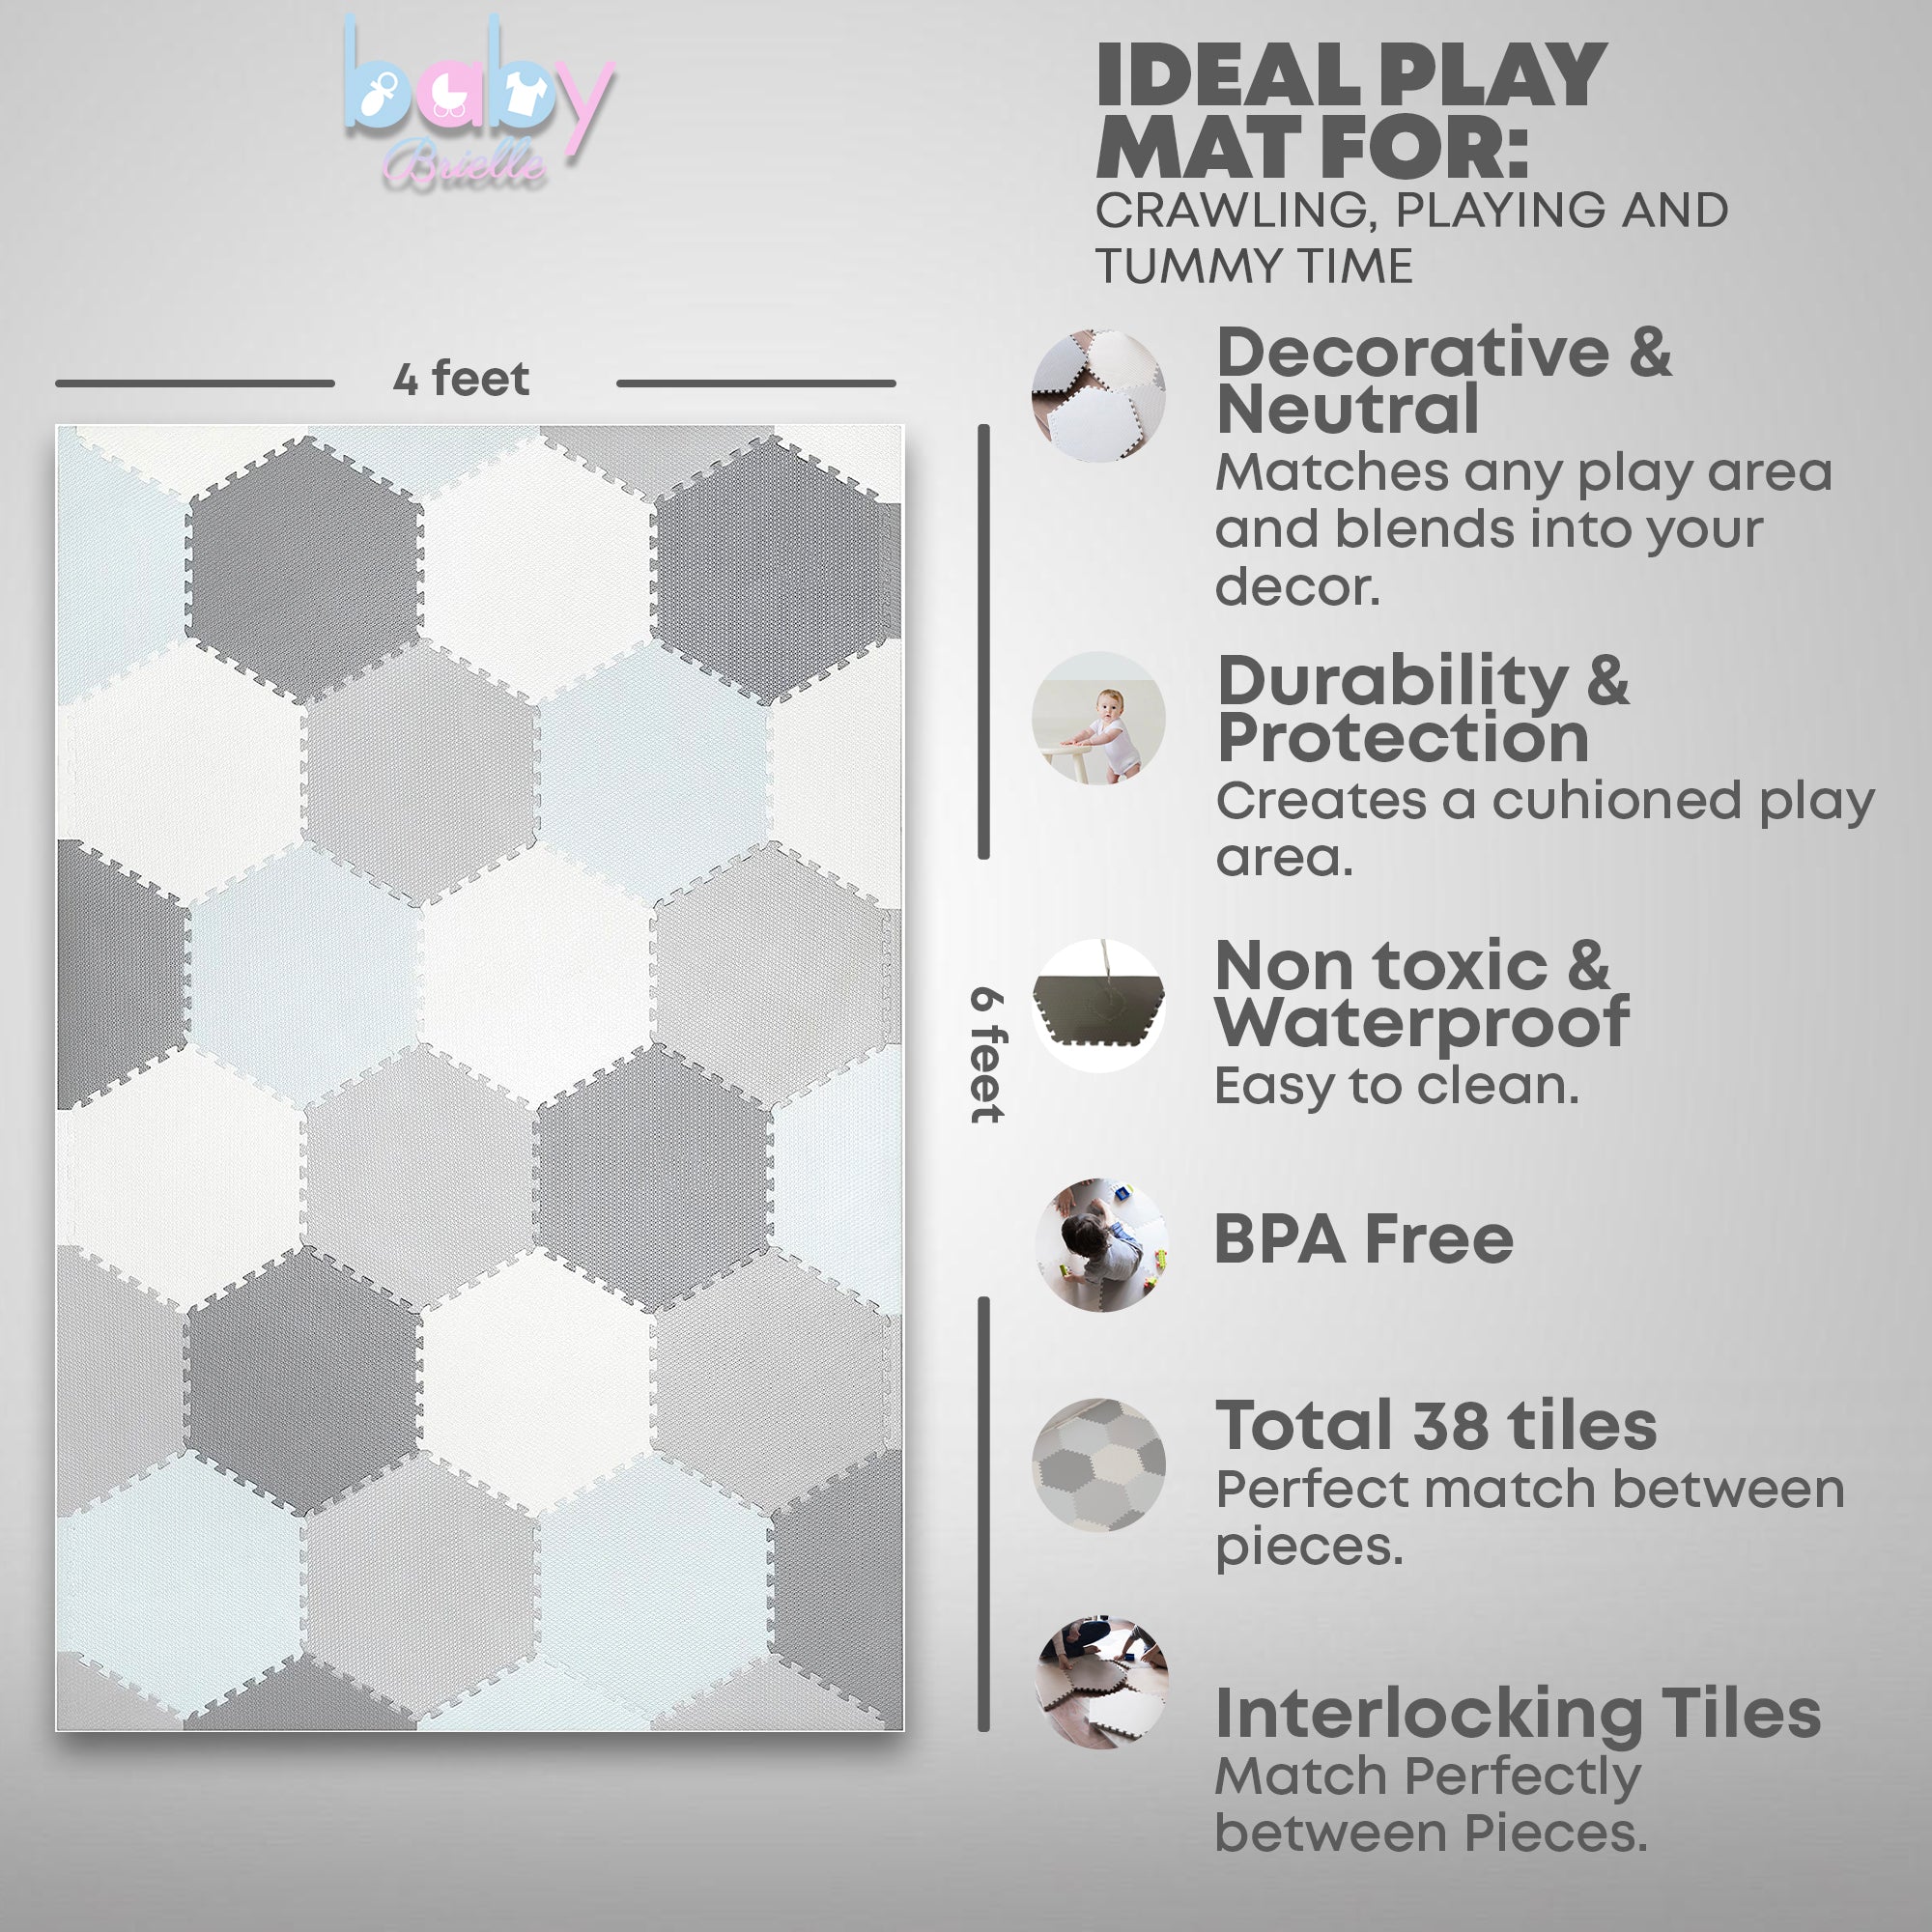 Baby Brielle Soft Extra Thick Interlocking Waterproof Non-Toxic Hexagon Foam Tile Play mat for Crawling, Playing- Puzzle Floor Mat for Babies & Toddlers- Nursery, Playroom - 48”x72”, 38 Pieces